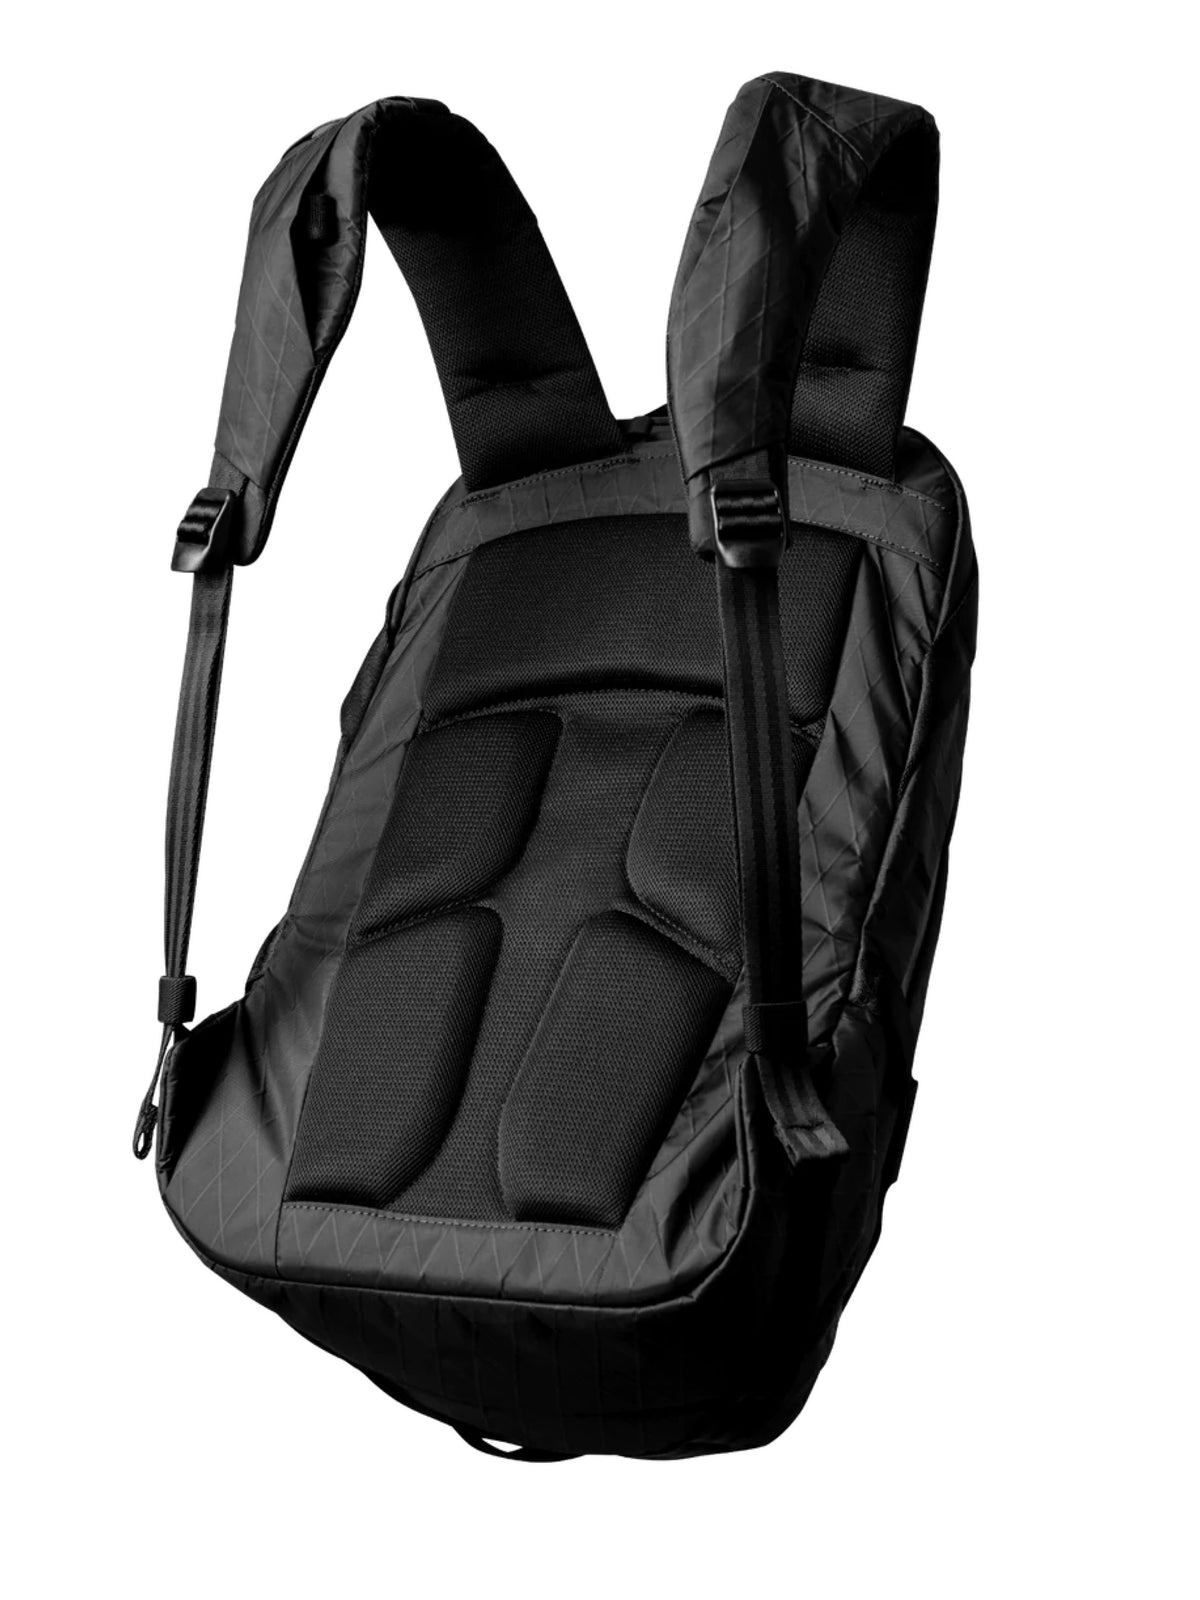 Able Carry Daily Backpack XPAC Deep Black